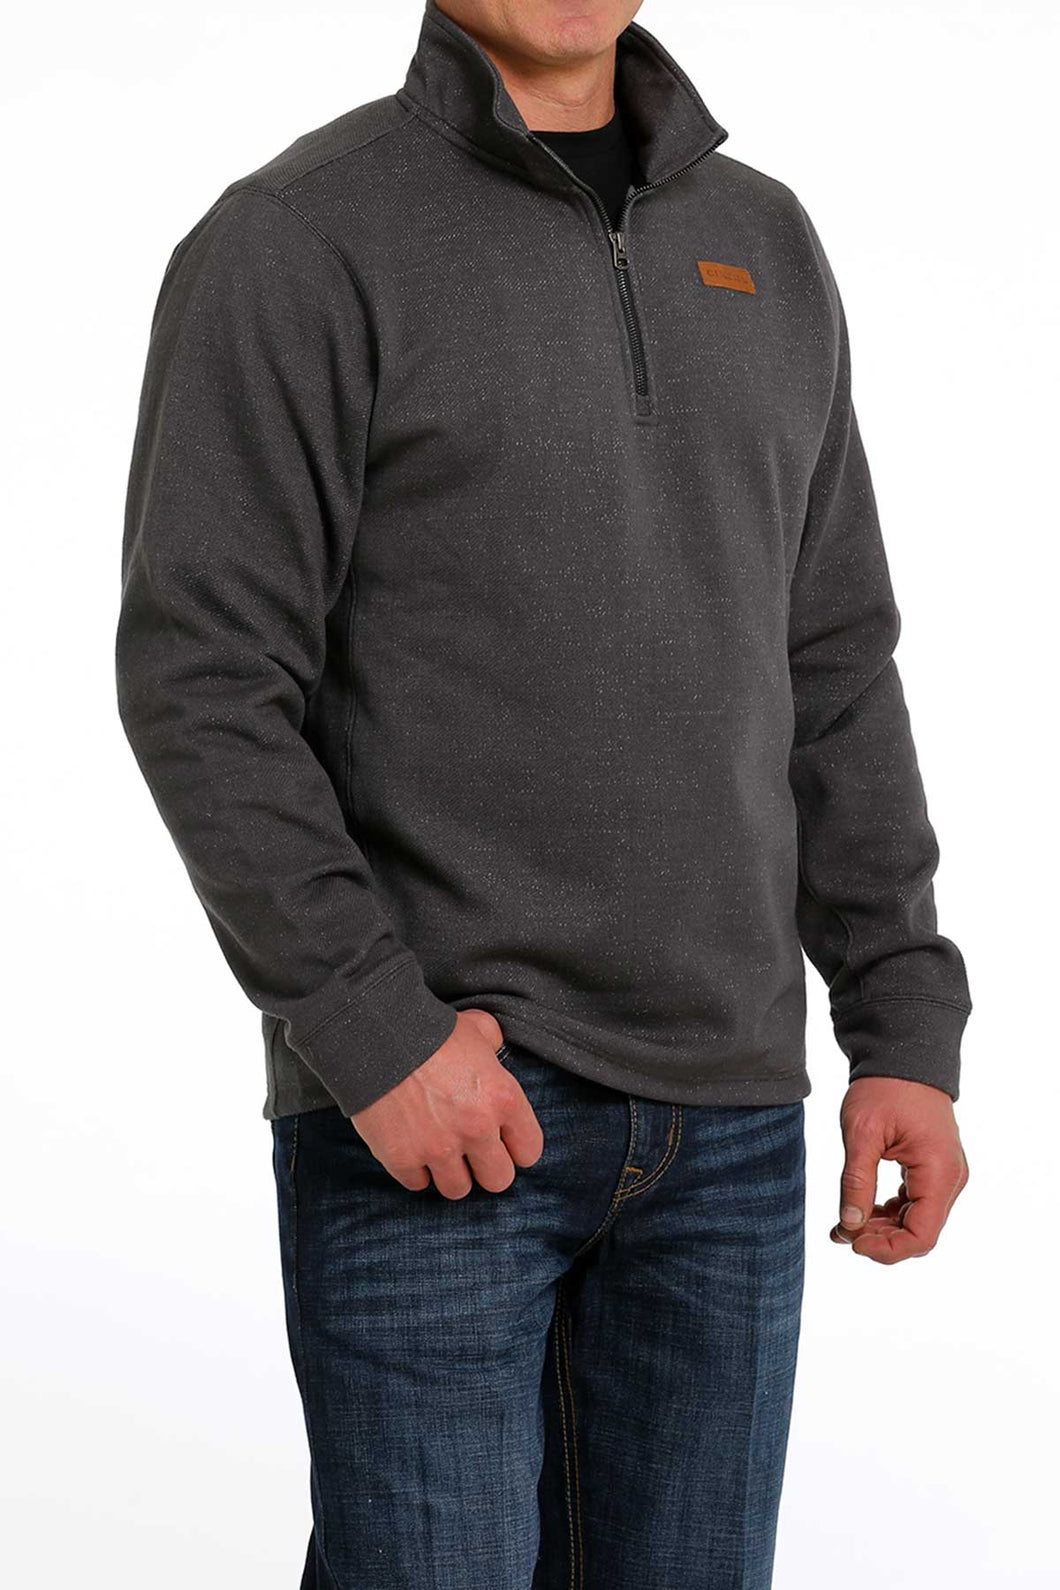 'Cinch' Men's 1/4 Zip Pullover Knit Sweater - Charcoal